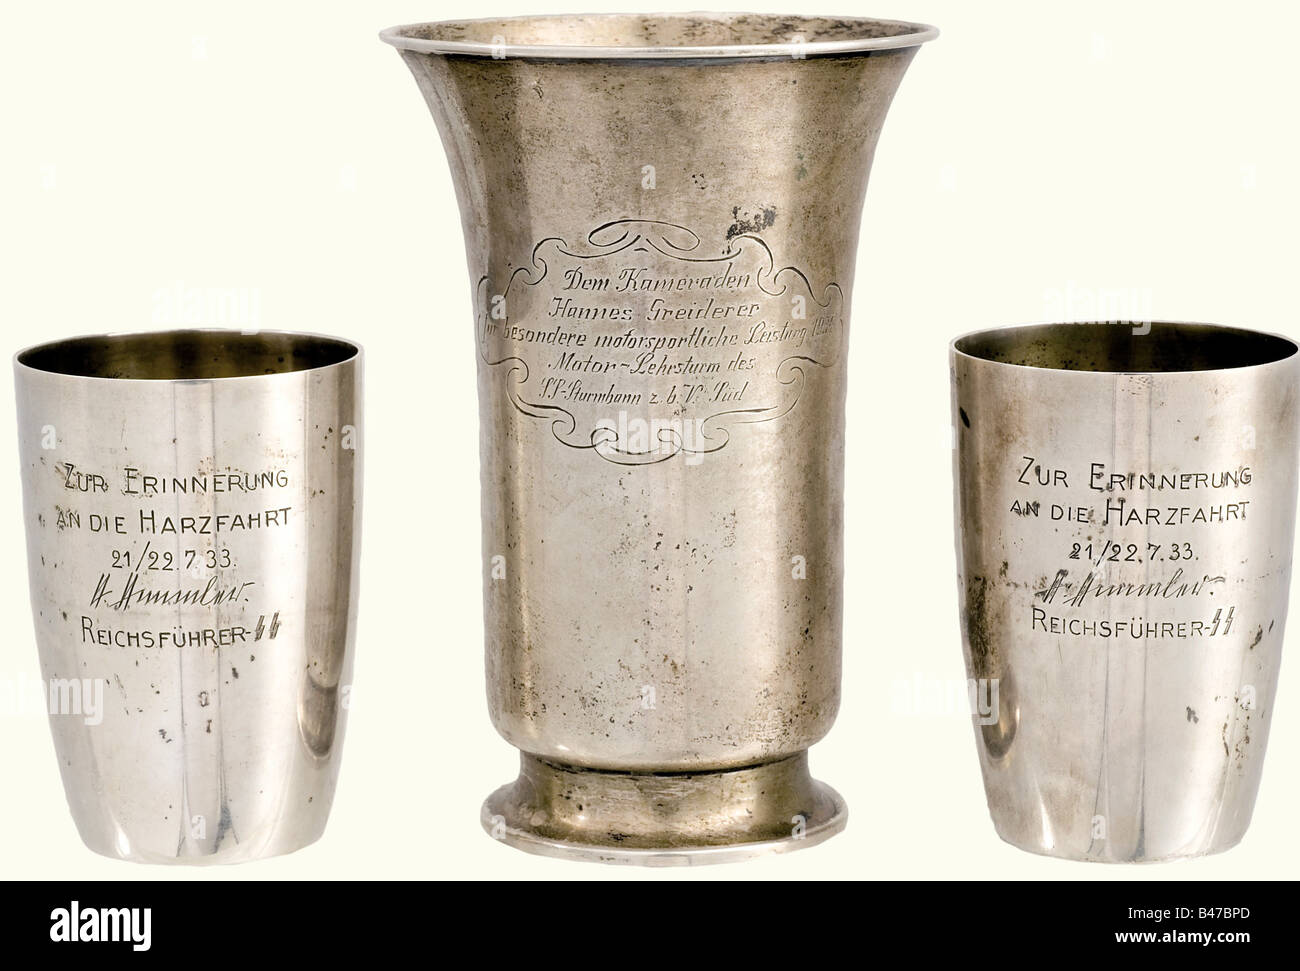 SS-Obersturmführer Hannes Greiderer, two silver presentation beakers 1933 from Heinrich Himmler and a 1934 presentation beaker from the Gahr workshop. Identical beakers with gilt interior surfaces, the viewing surfaces engraved (transl.) 'In remembrance of the Harz (Mountains) trip 21 - 22 July, 1933 - Heinrich Himmler - Reichsführer SS'. At the bottoms mark of fineness '835' and number '63725'. Height of each 78 mm. Weights 73 and 76 g. The third beaker is engraved on the viewing surface with the dedication (transl.) 'To comrade Hannes Greiderer for especial m, Stock Photo